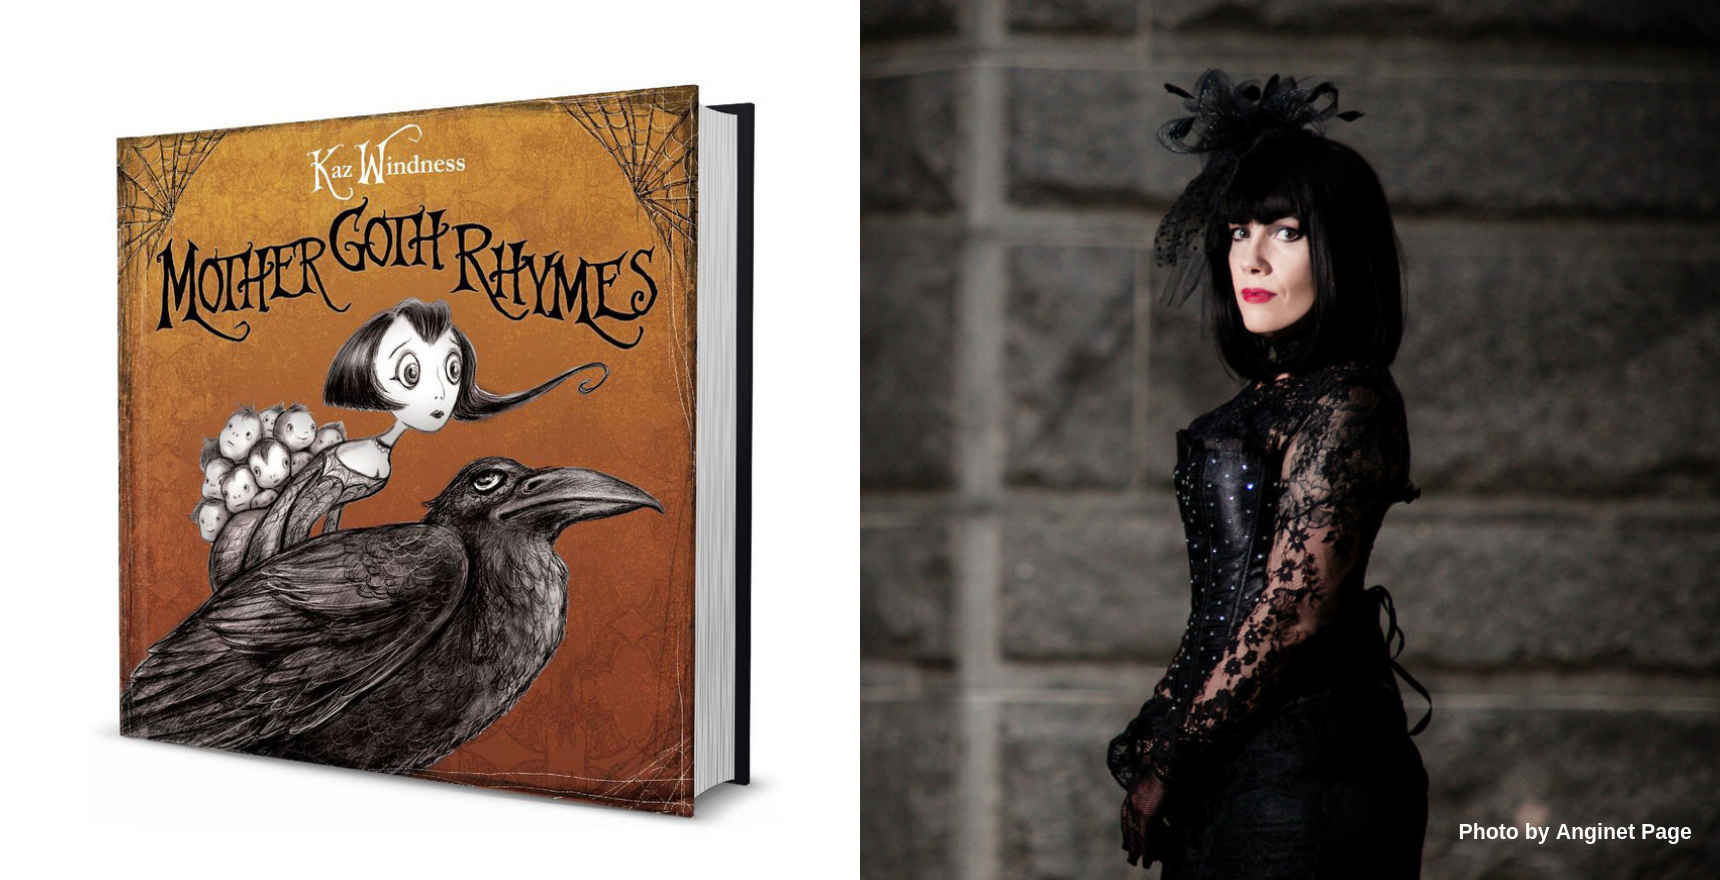 Mother Goth Rhymes book cover opposite Karen Windness in black